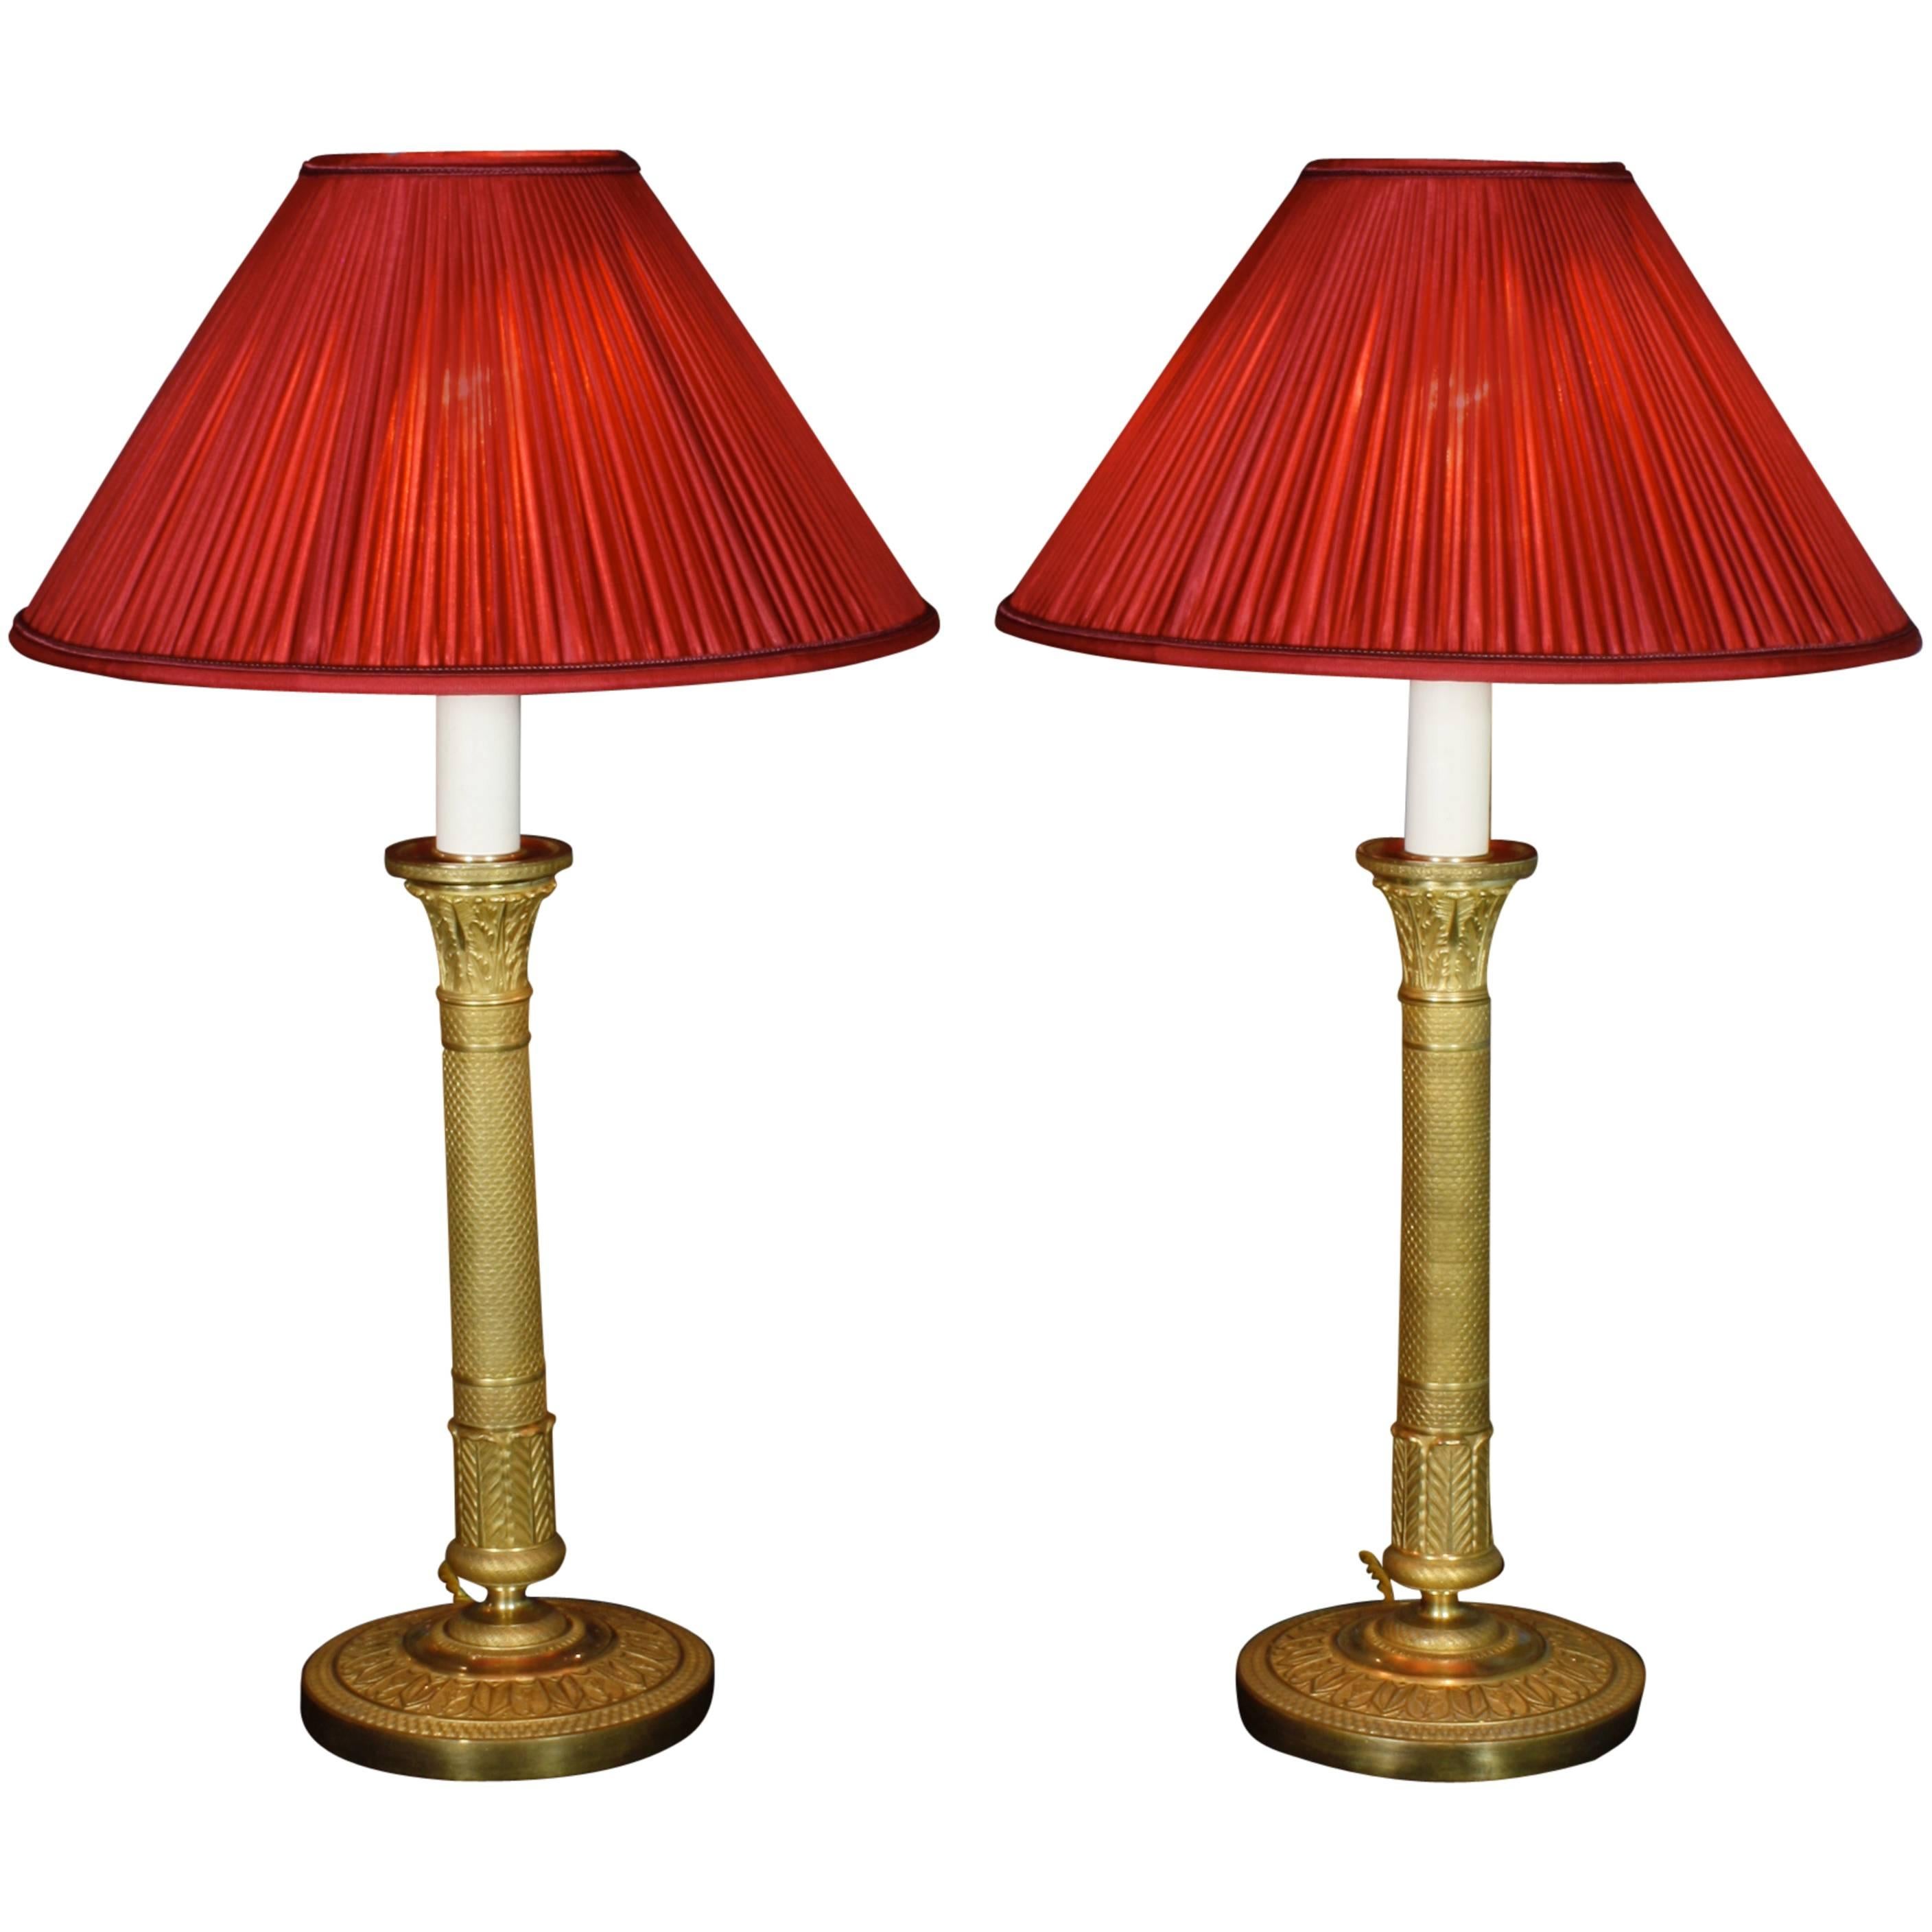 Pair of French Empire Style Candlestick Lamps with Silk Shades